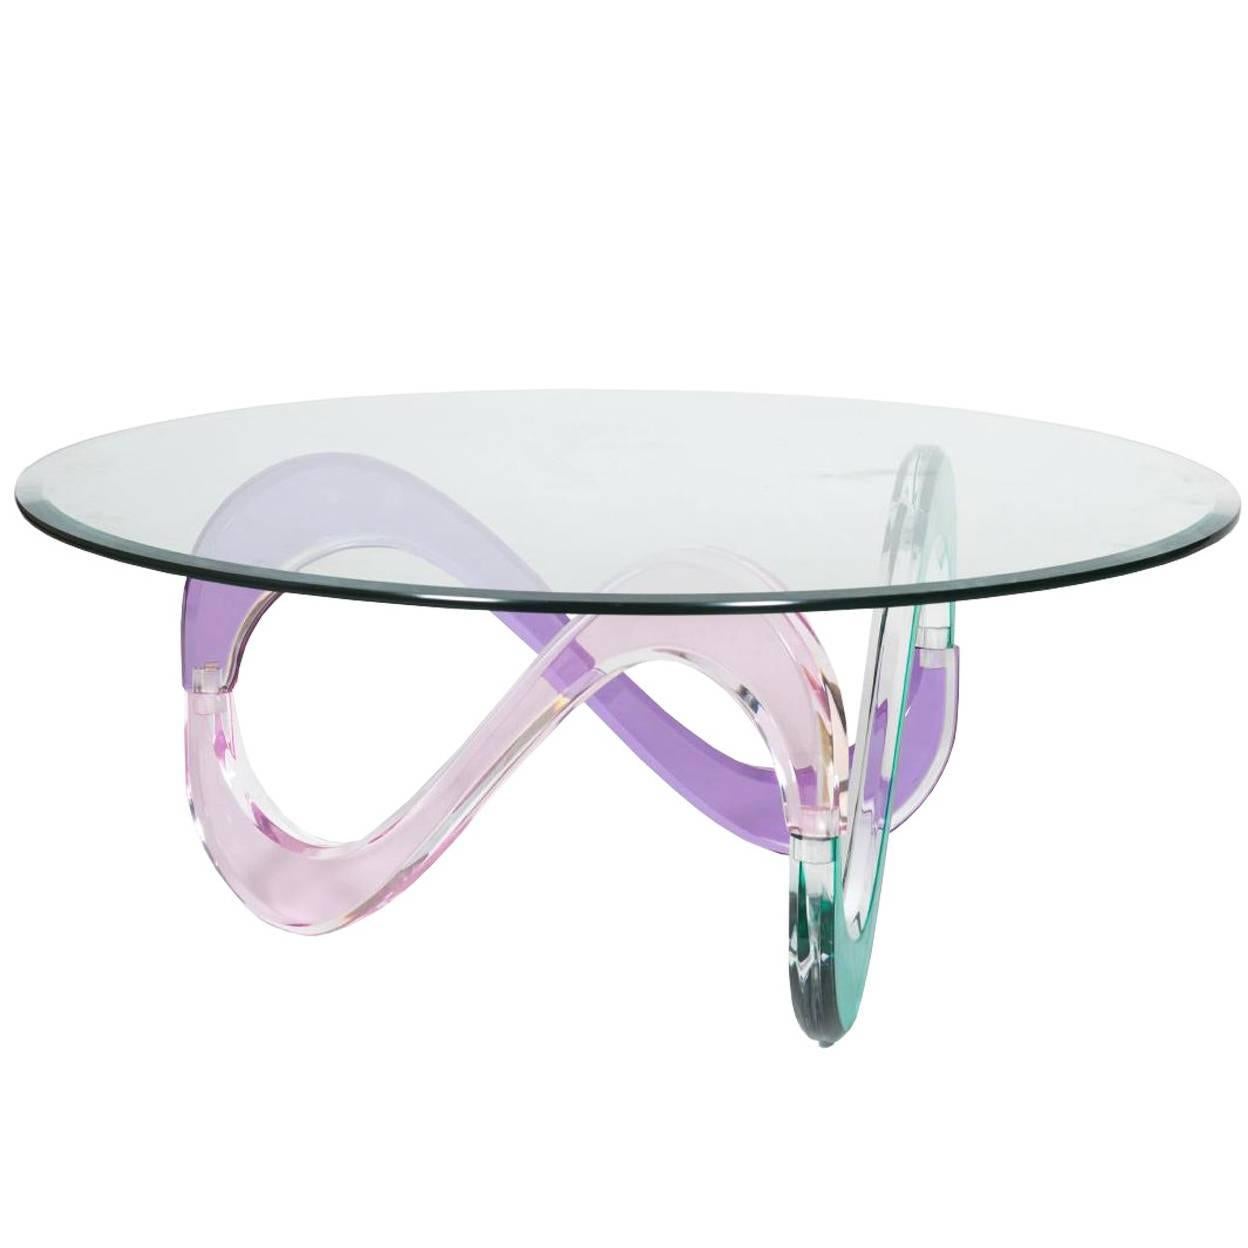 Shlomi Haziza Infinty Lucite Coffee Table For Sale